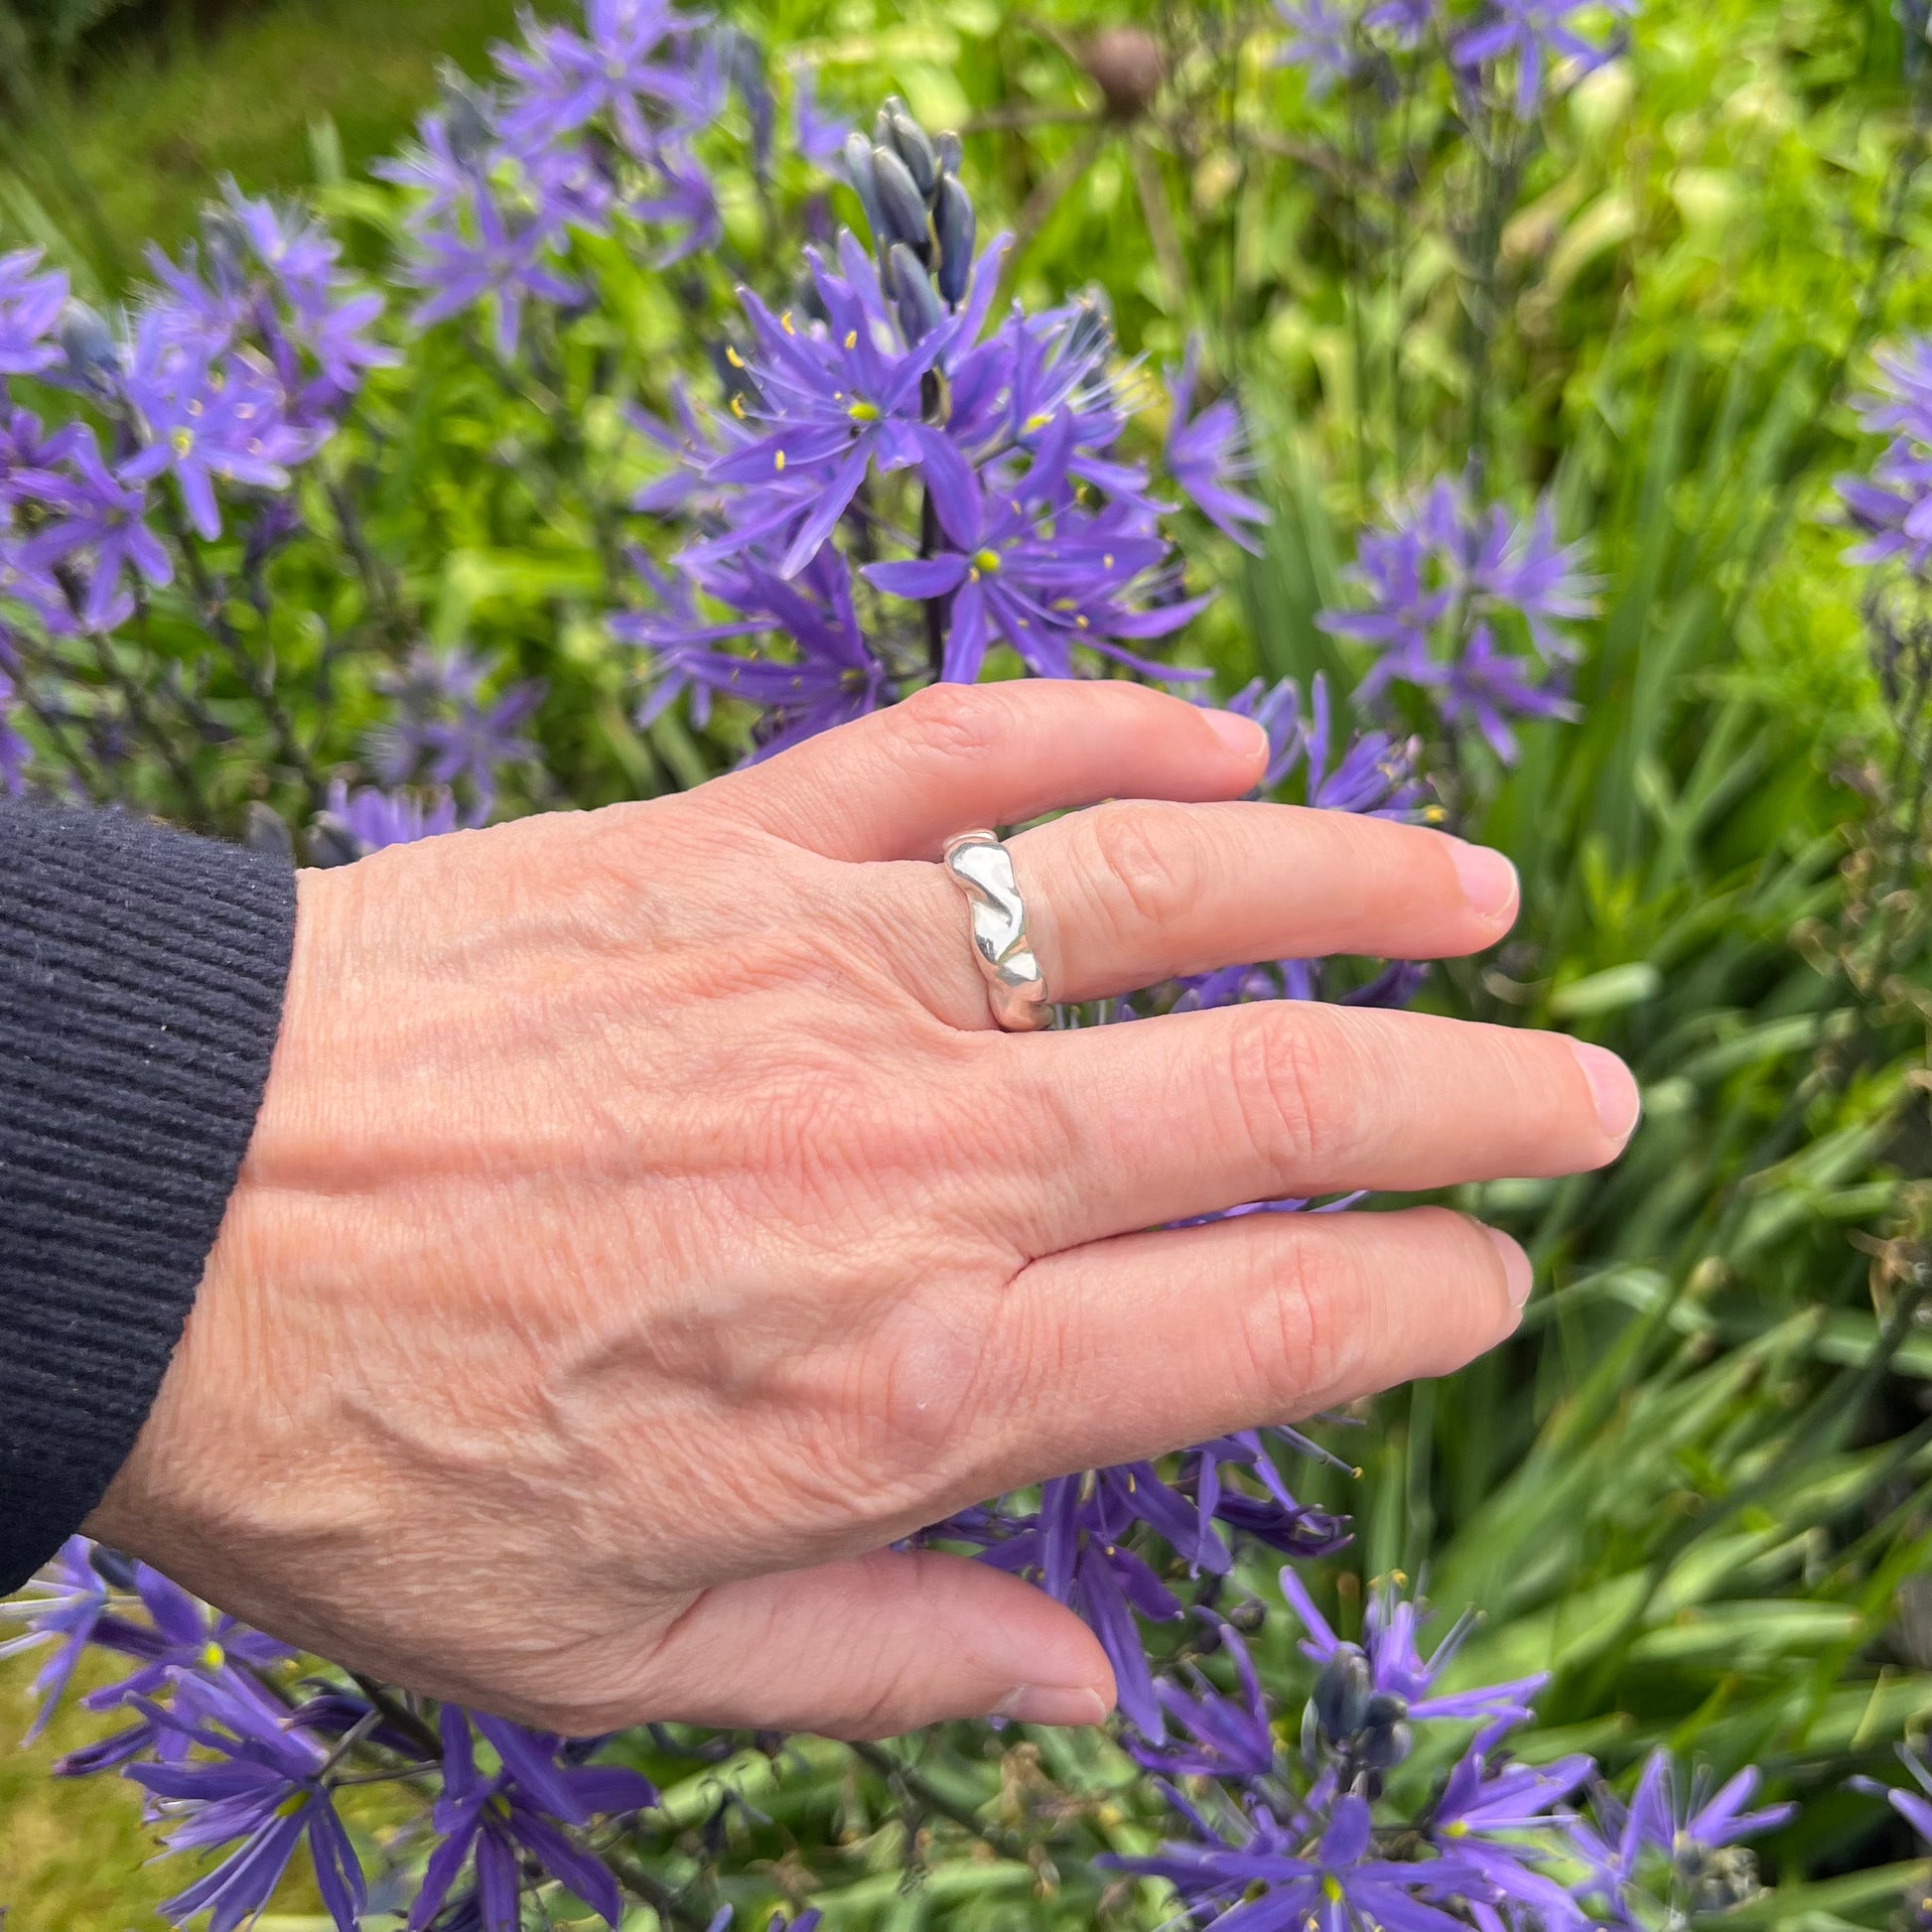 The wave ring in shiny sterling silver on a hand with a background of purple flowers.